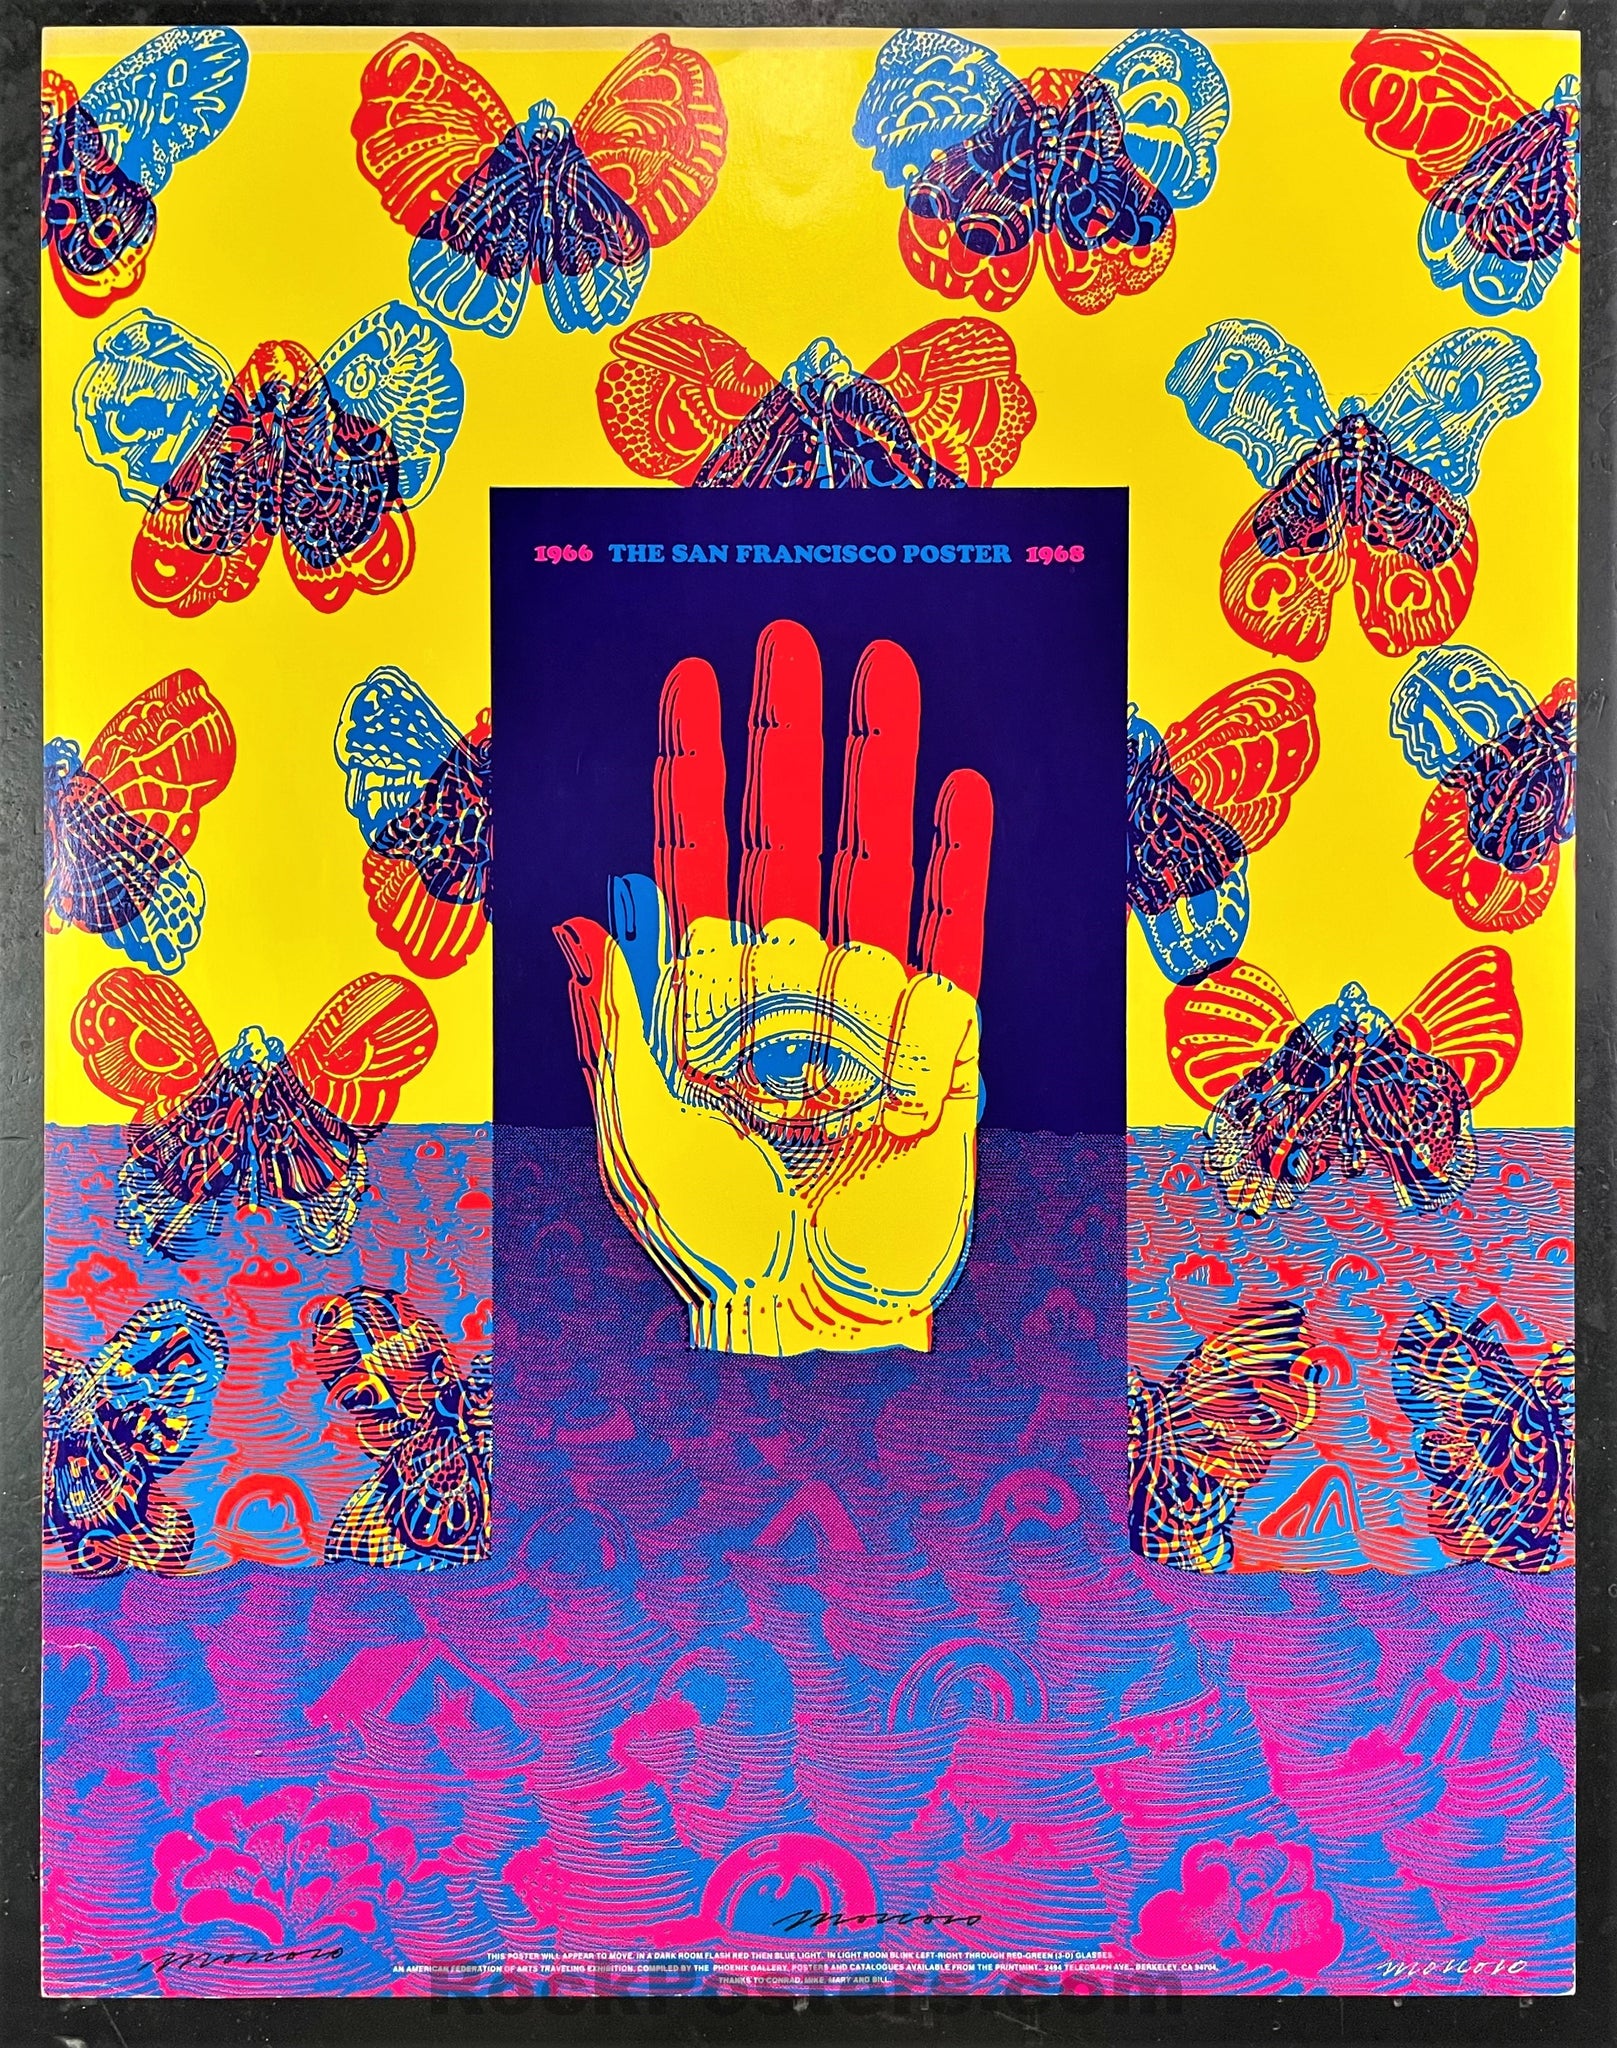 AUCTION - Neon Rose 26 - The San Francisco Poster - Moscoso SIGNED - 1968 Poster - Excellent